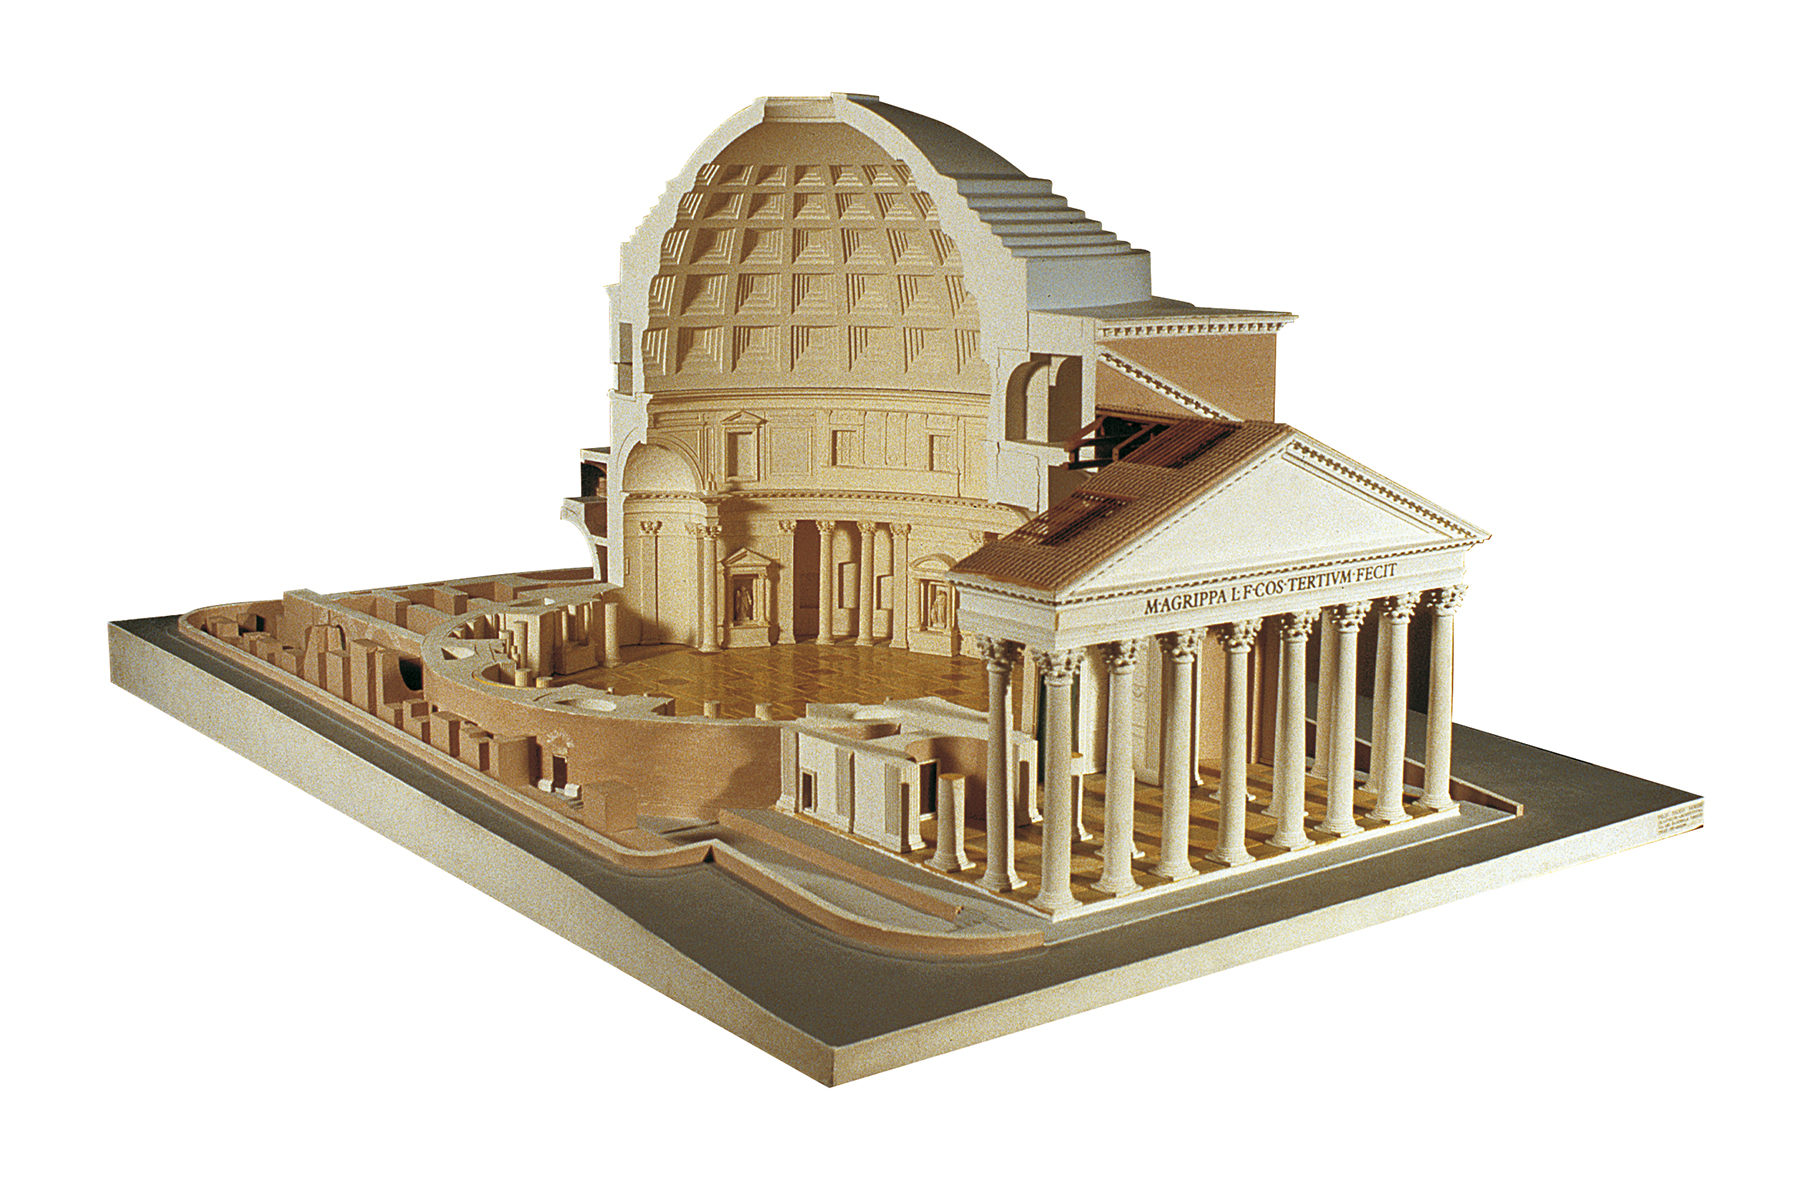 The Pantheon (architectural model)